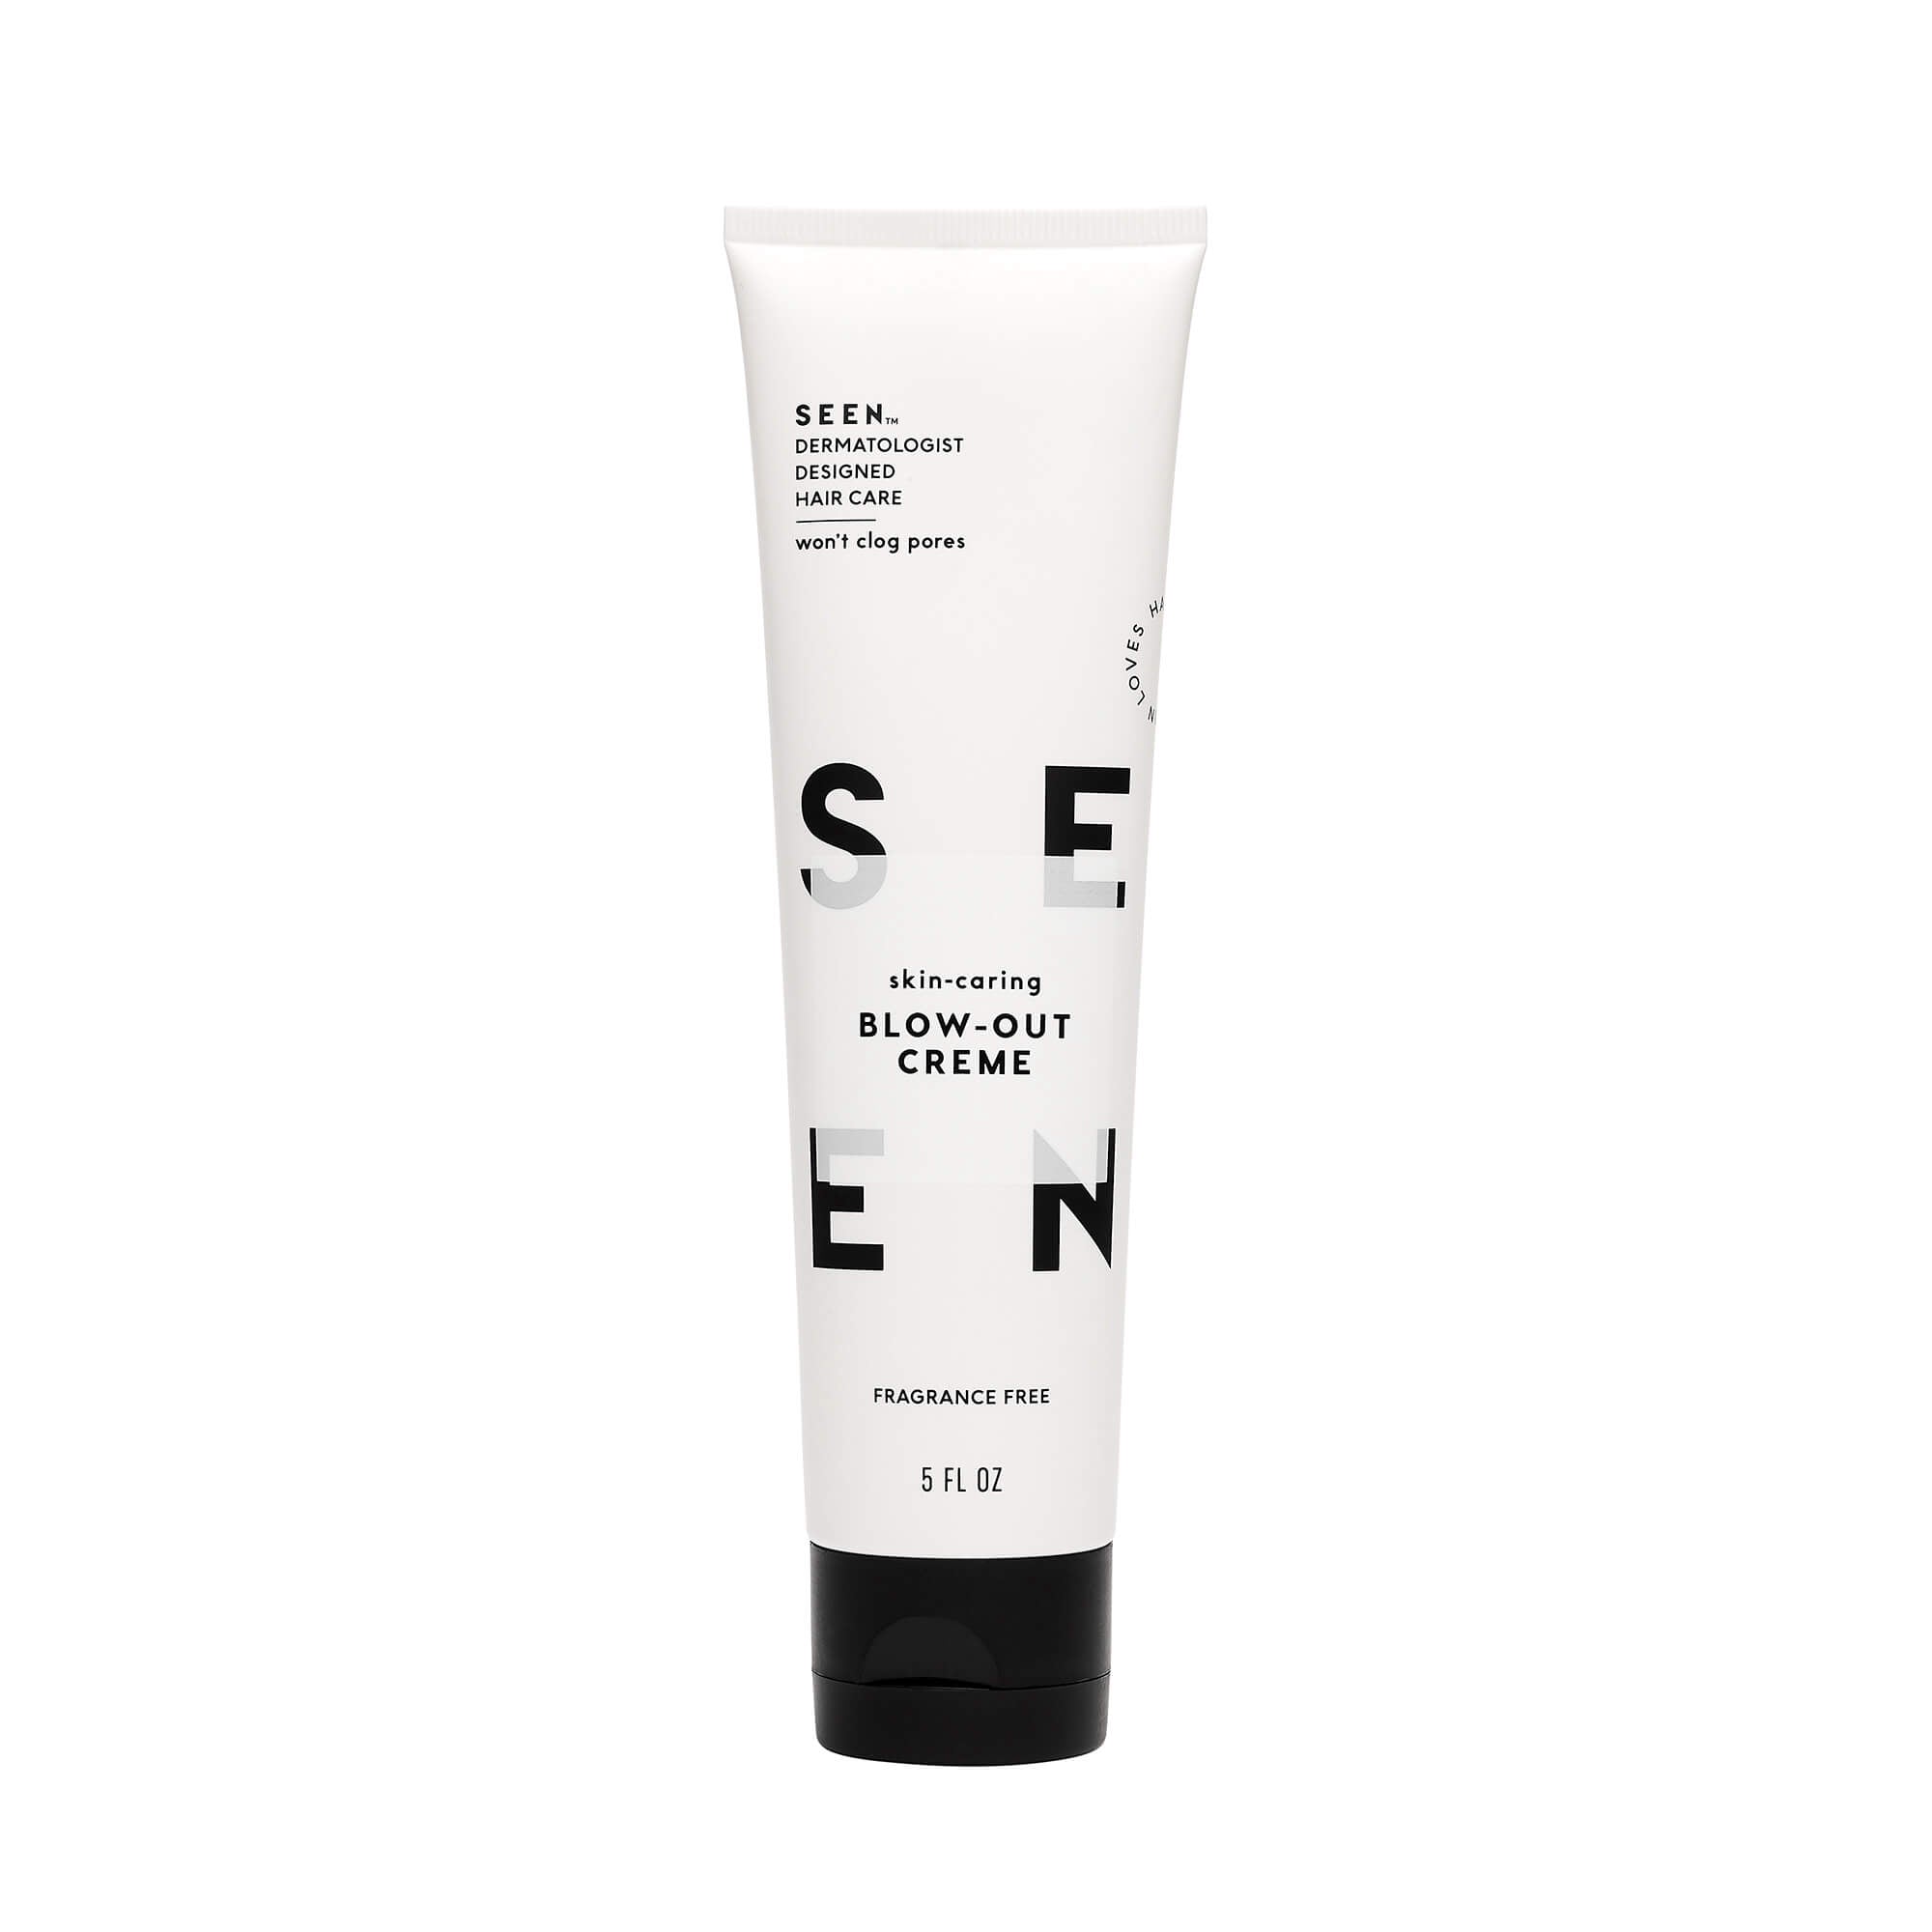 Image of SEEN Blow-Out Creme, Fragrance Free